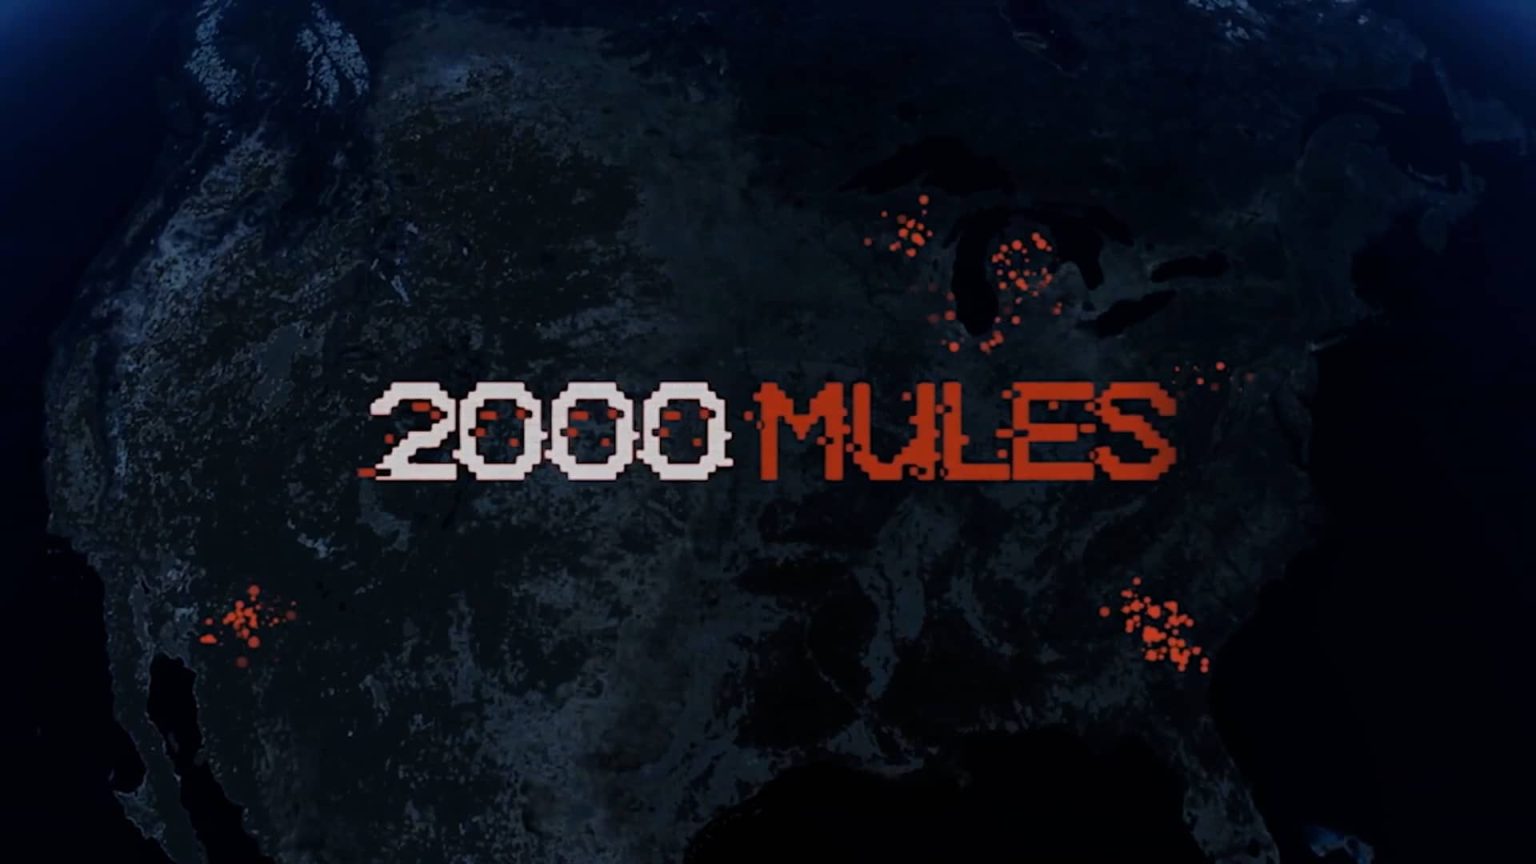 What We Can Expect From “2000 Mules”